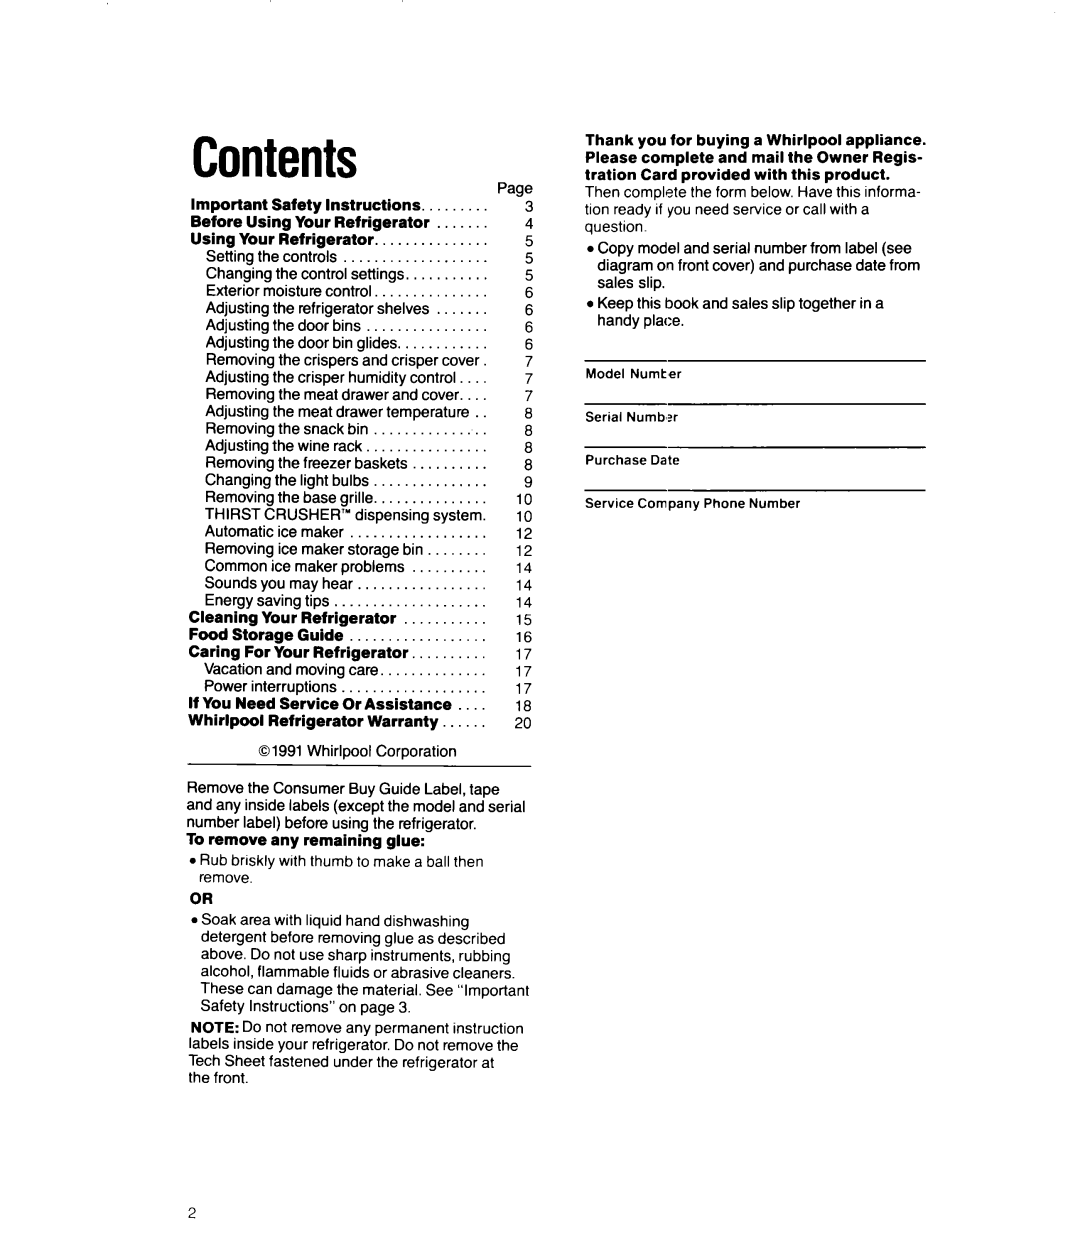 Whirlpool ED25RQ manual Contents 